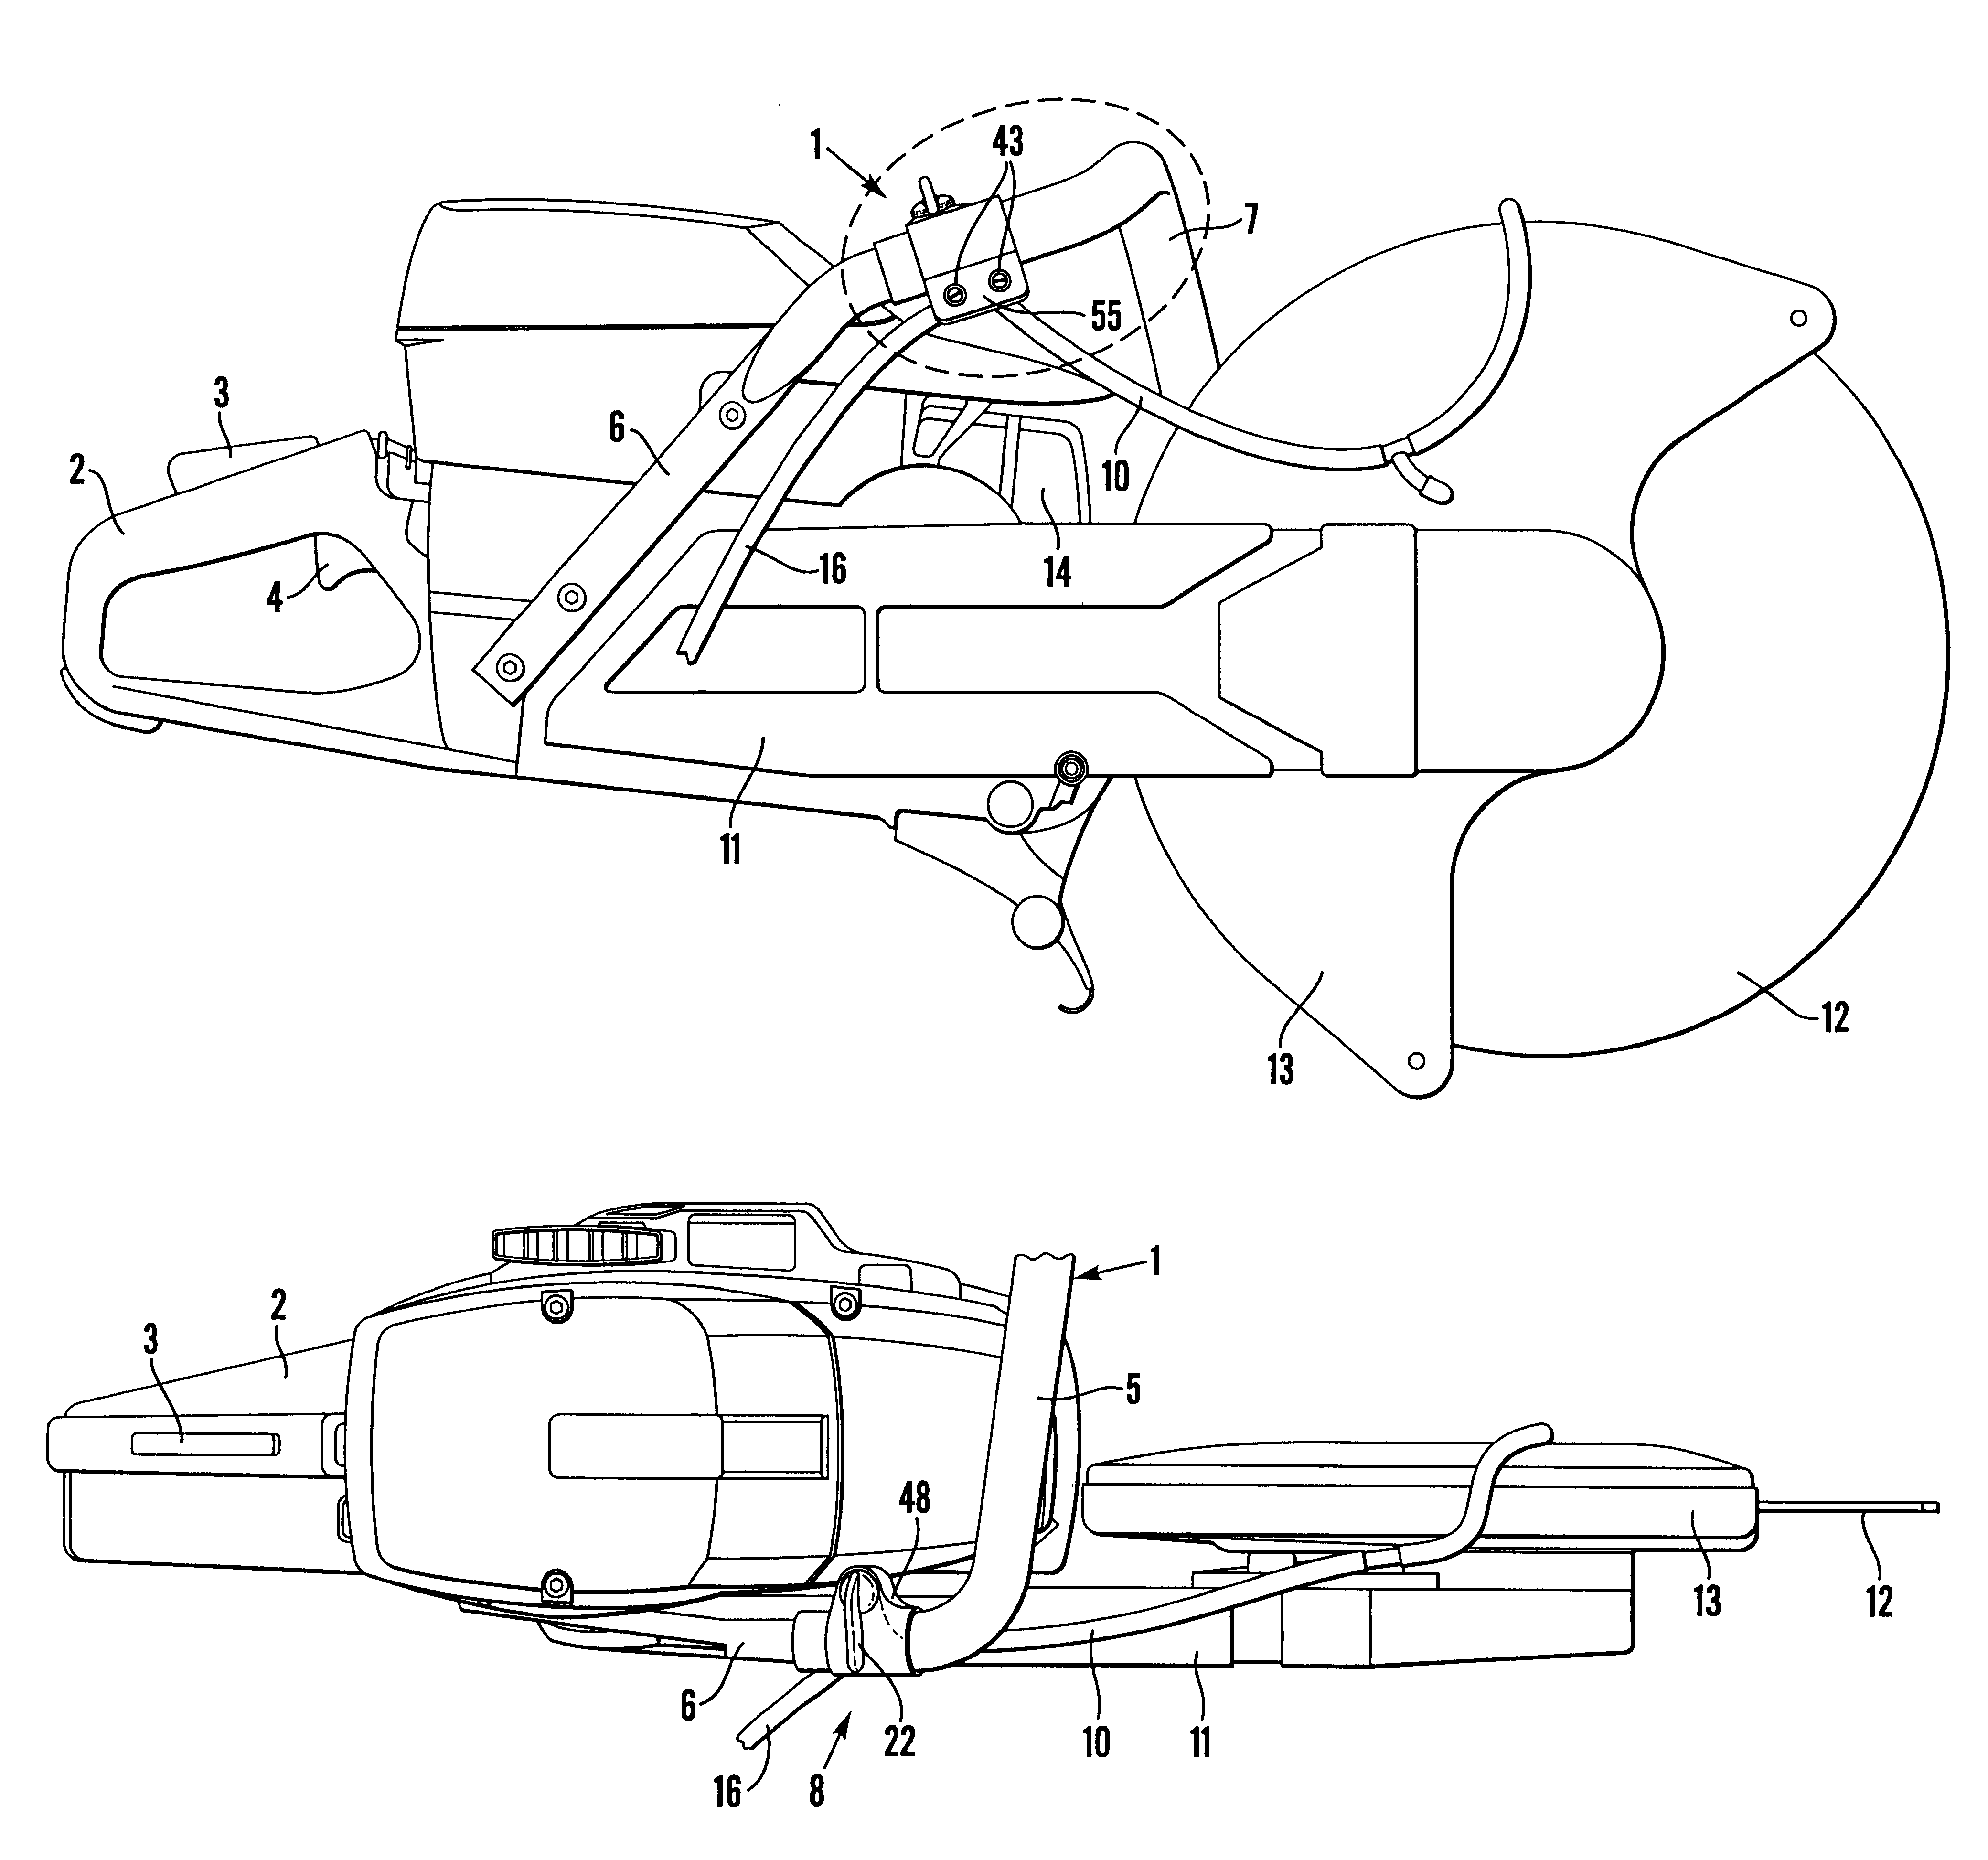 Device on a portable cutting or sawing machine